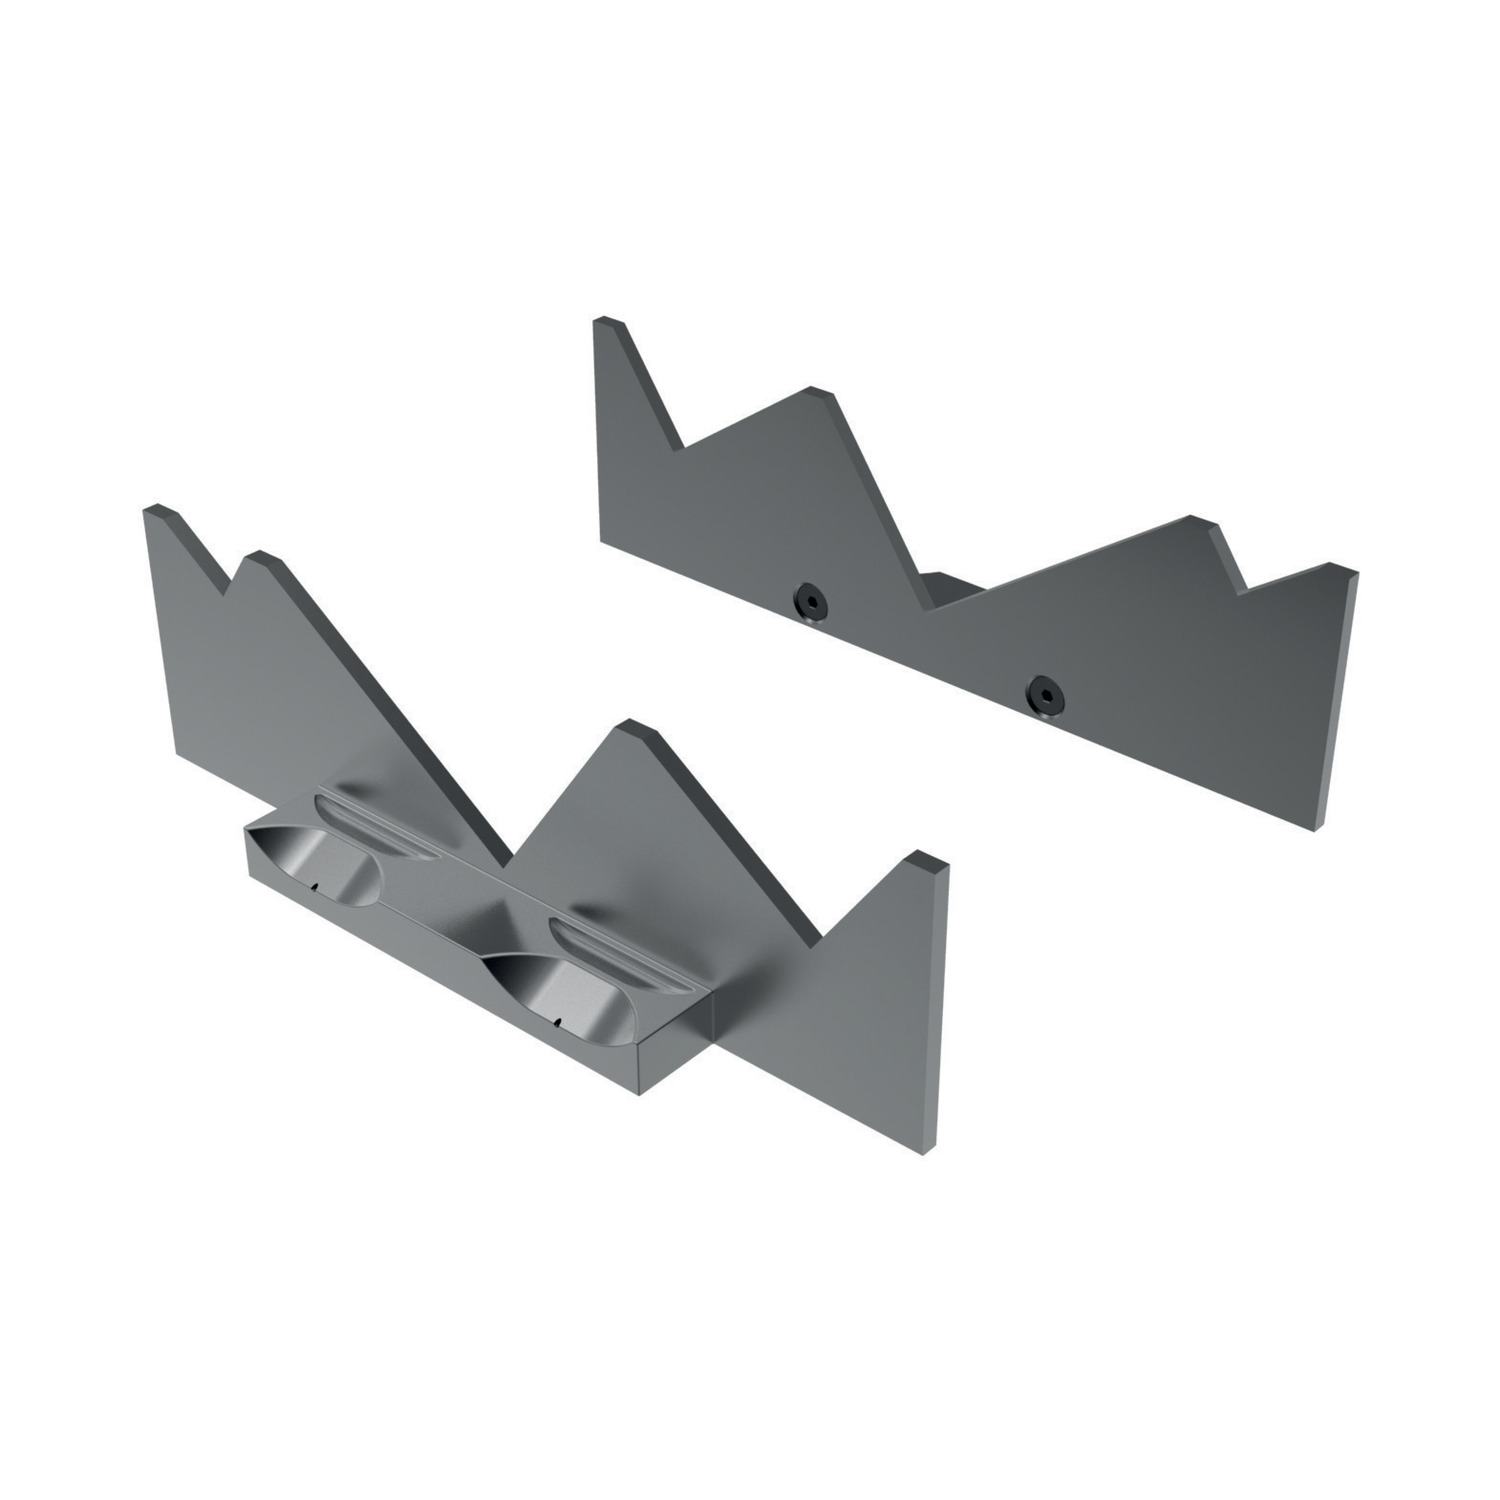 Product 19816, Vice Mill Angles - AccuSnap for use with AccuSnap master jaws 19810 / 